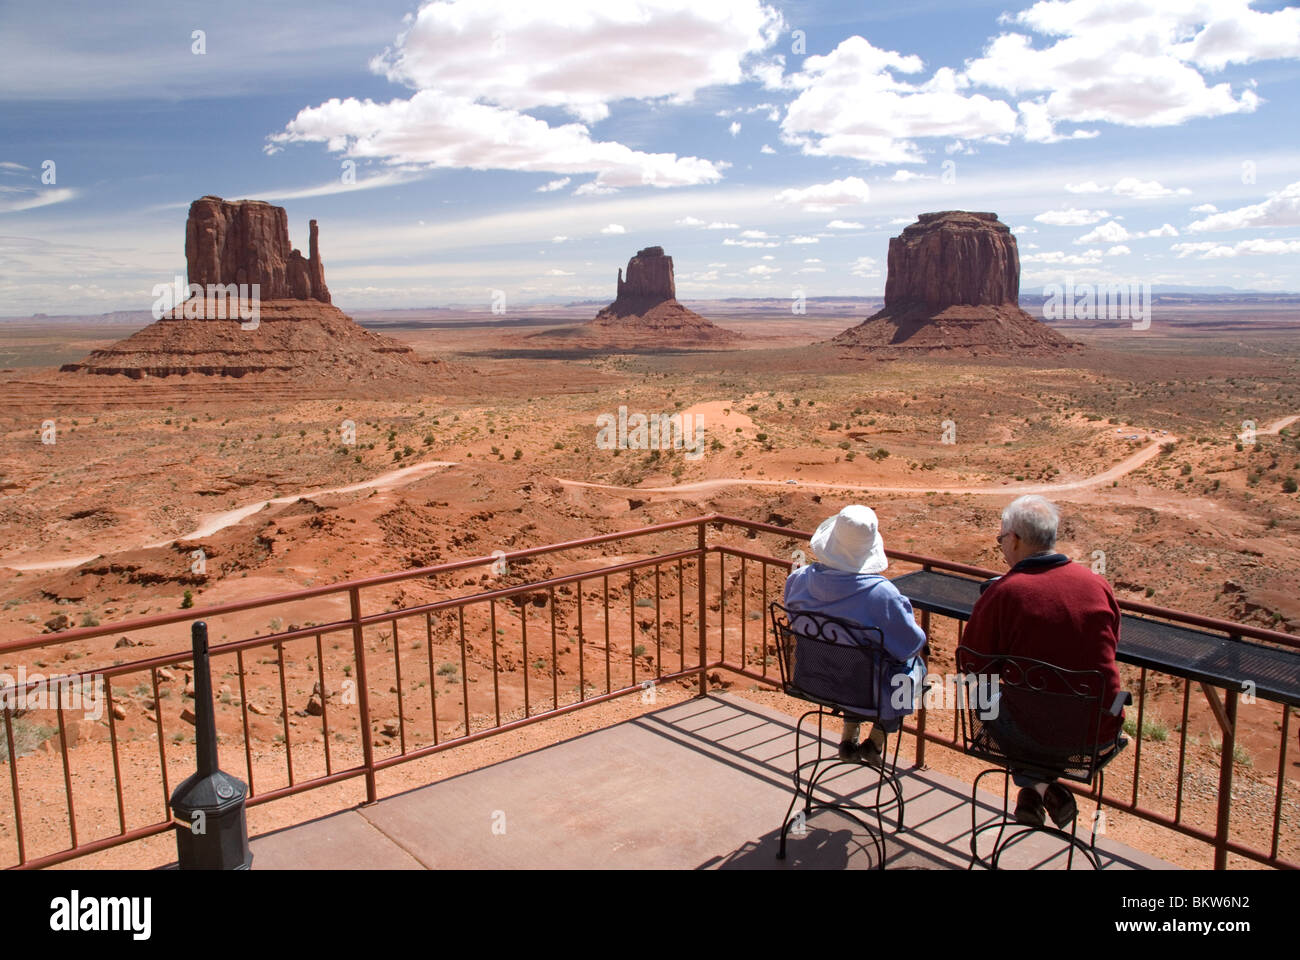 Tourists At The Navajo Tribal Park Visitors Center Monument Valley Utah